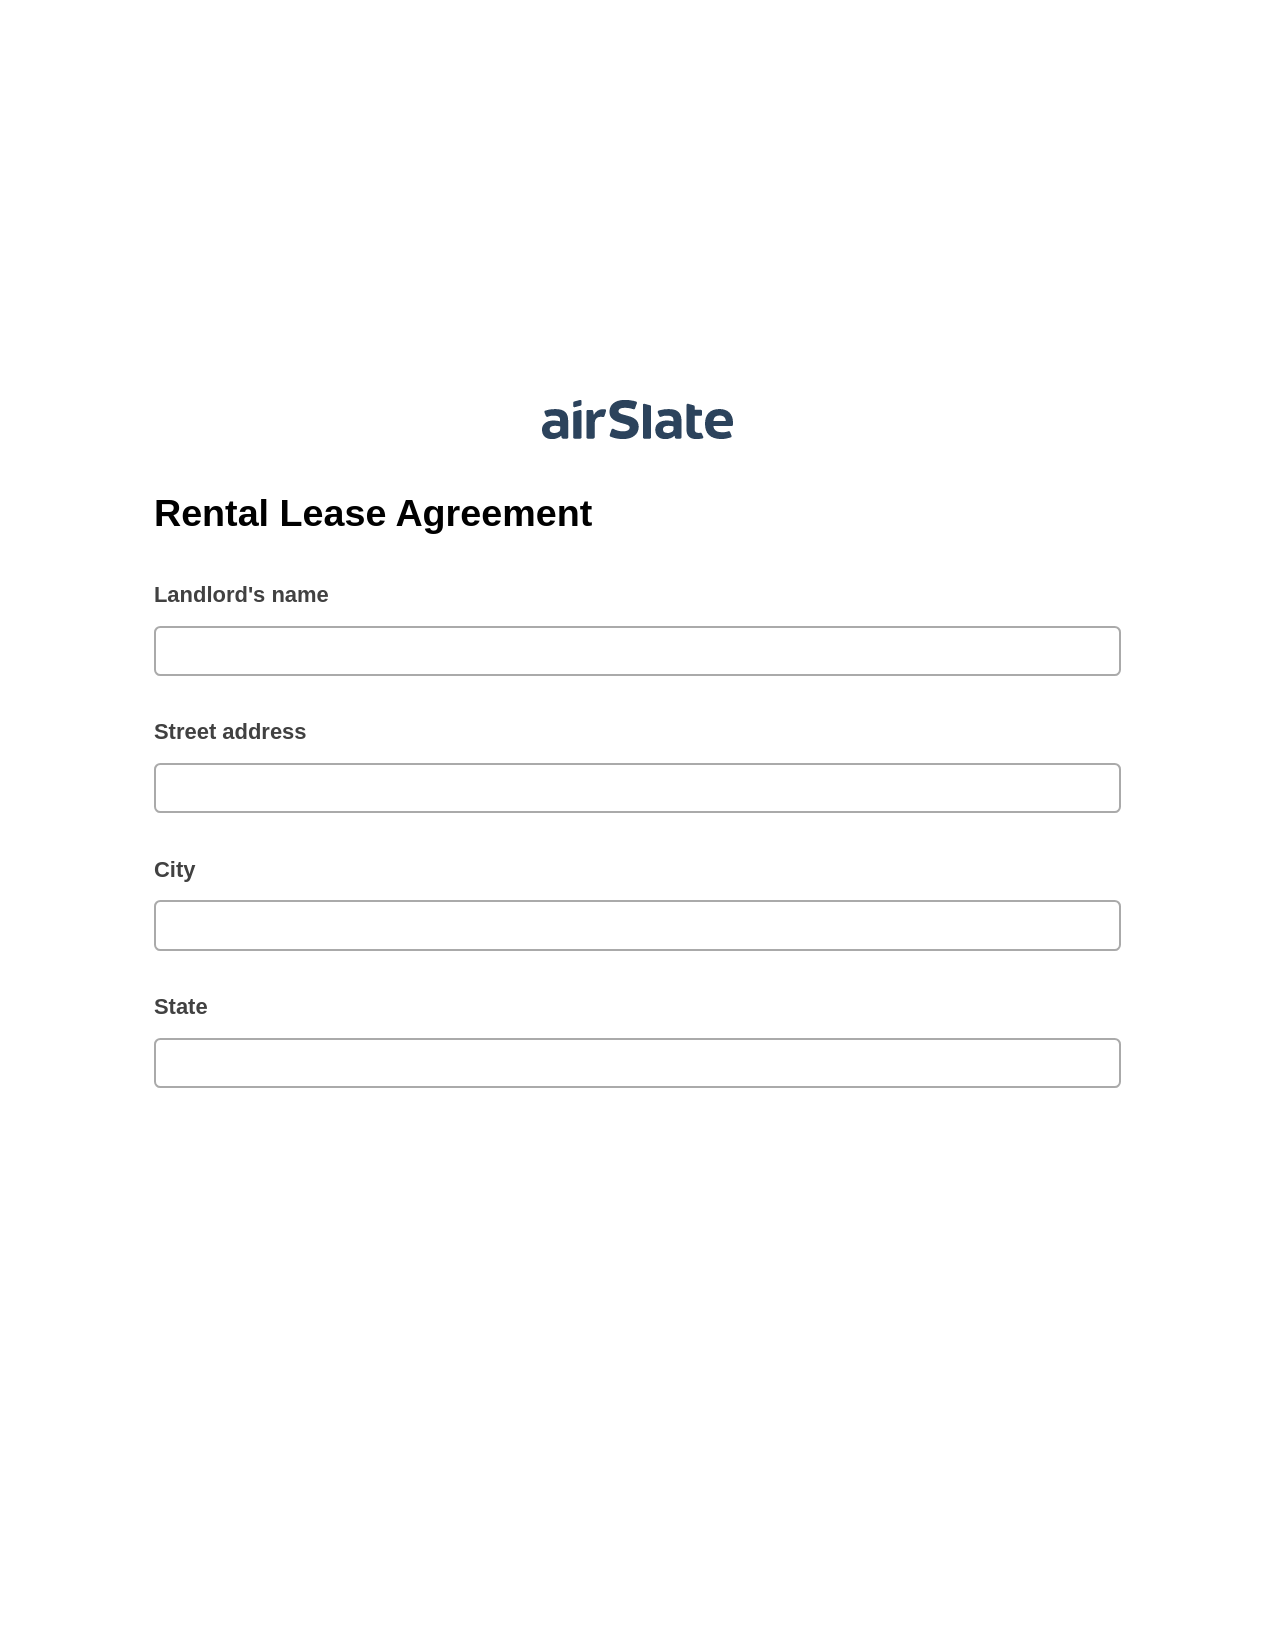 Rental Lease Agreement Pre-fill Dropdowns from Office 365 Excel Bot, Invoke Salesforce Process Bot, Export to NetSuite Record Bot